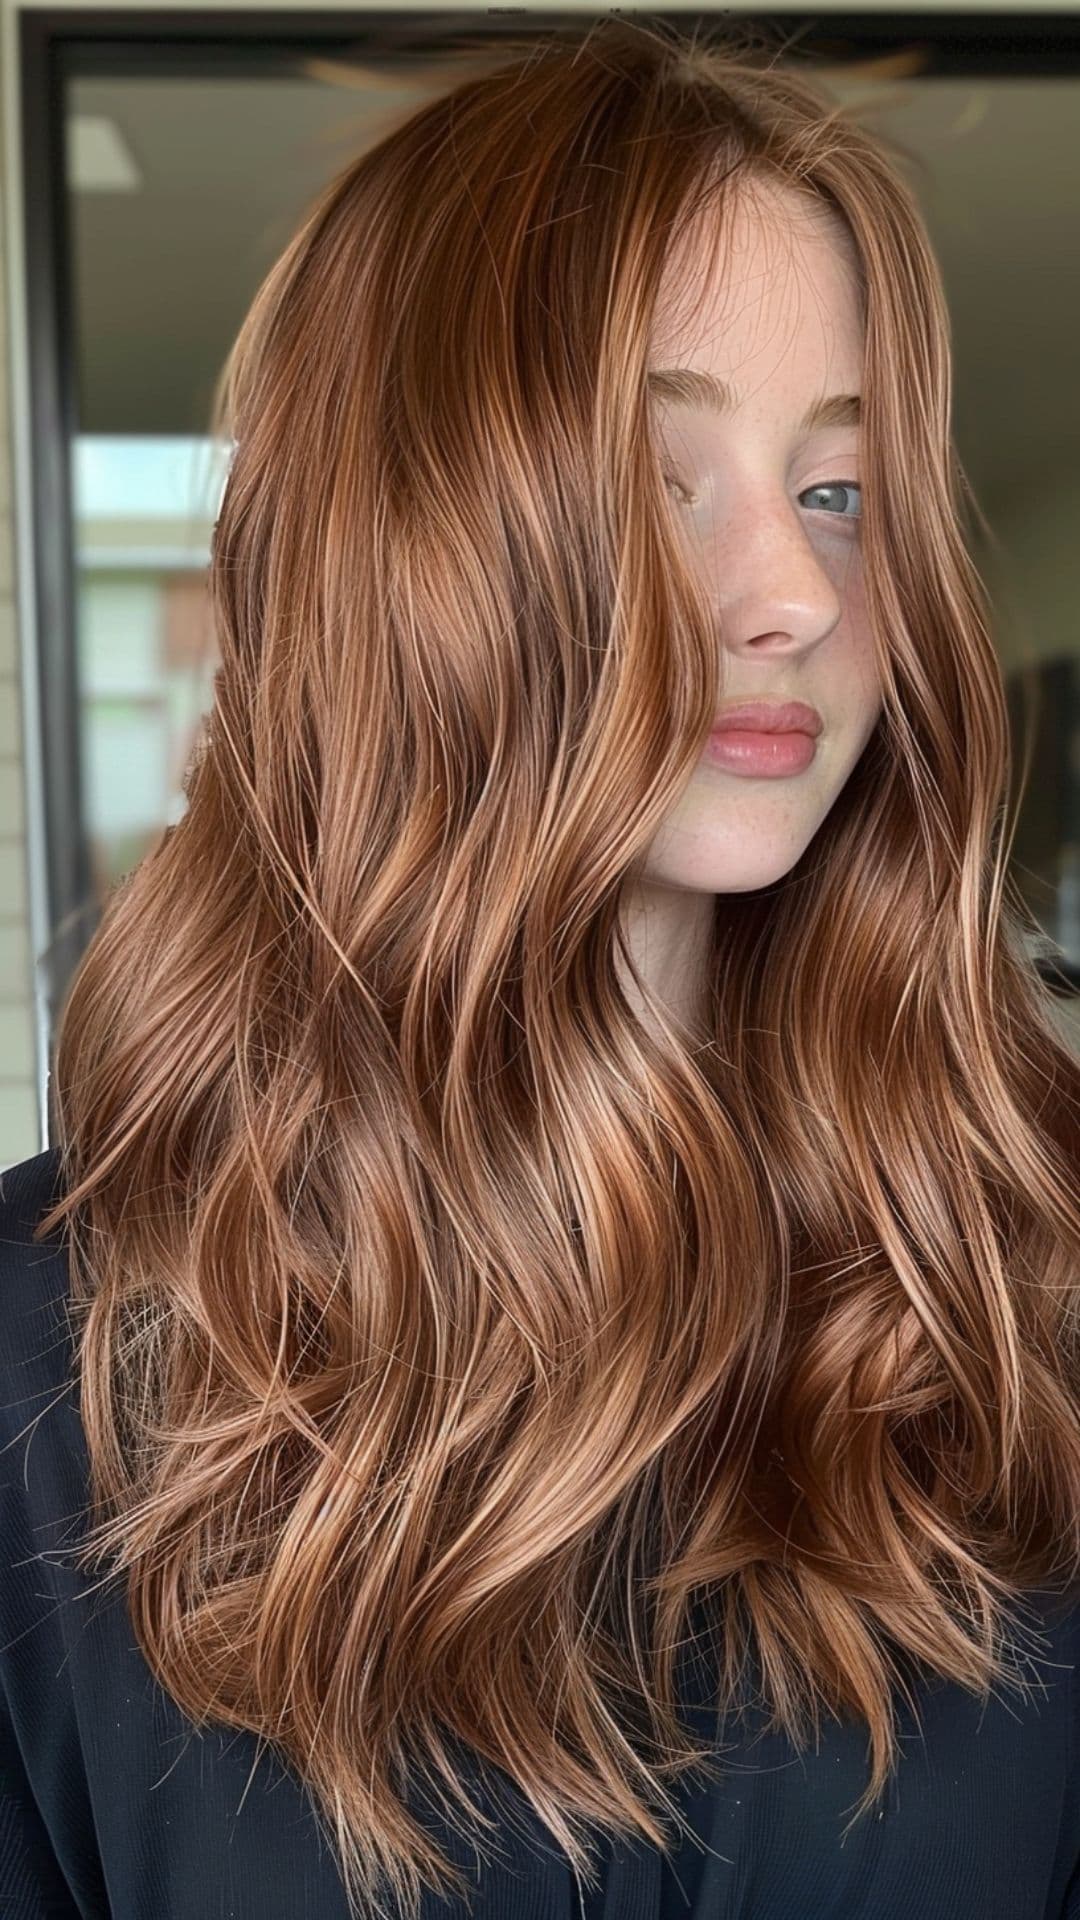 A woman modelling a subtle copper highlights hair.